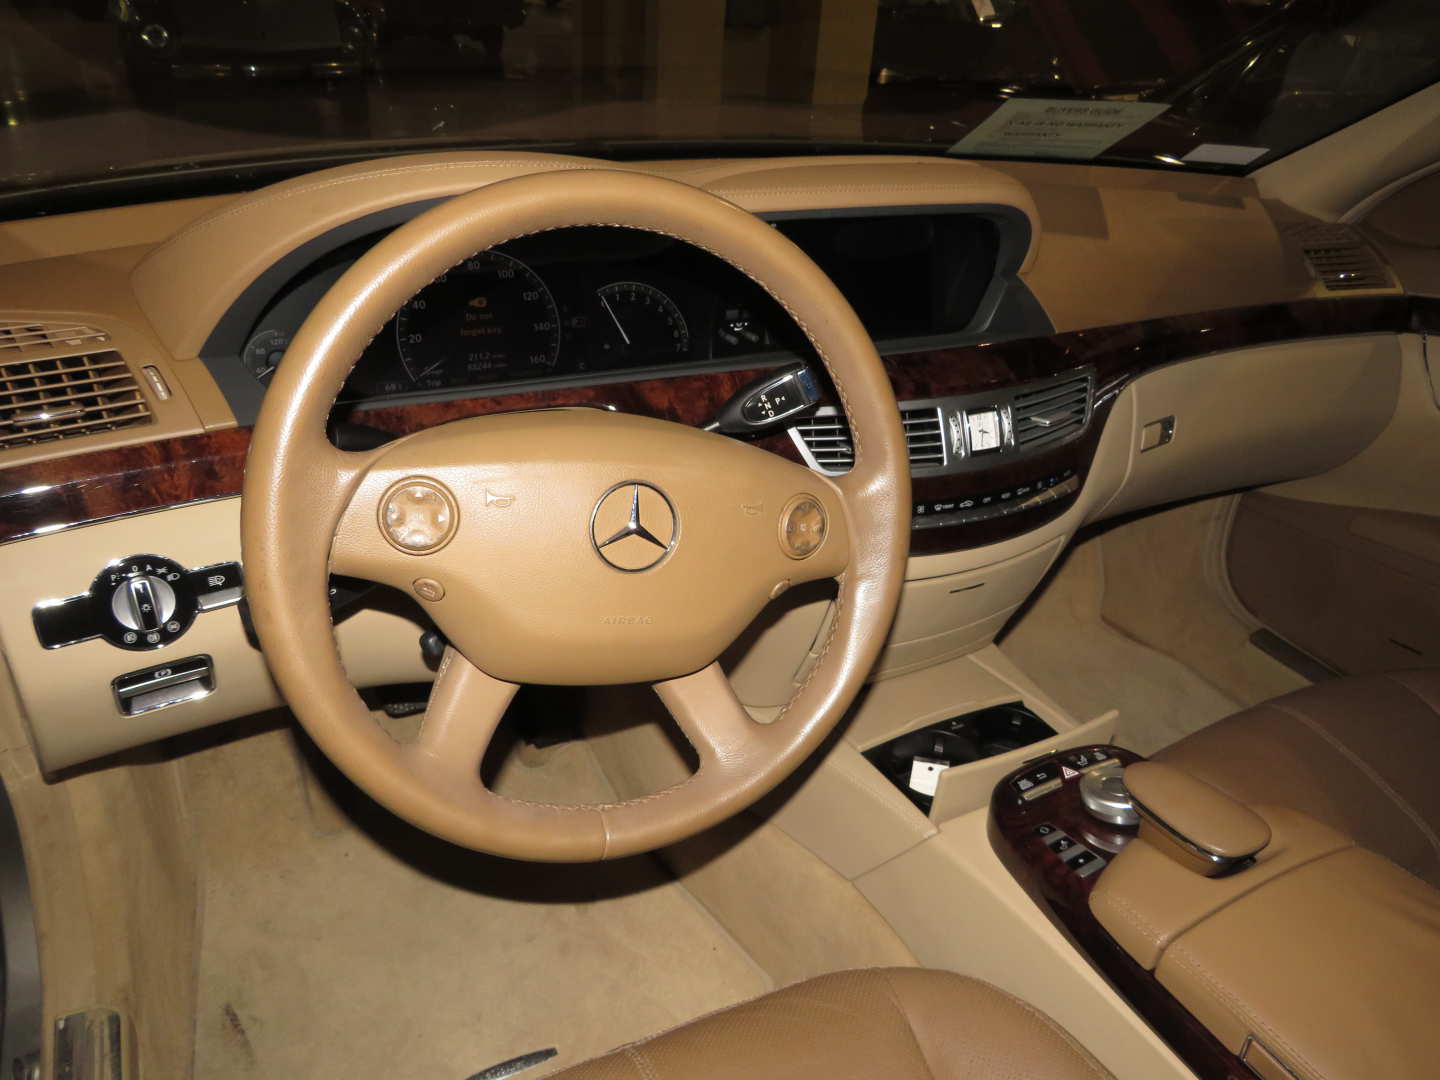 6th Image of a 2007 MERCEDES-BENZ S-CLASS S550